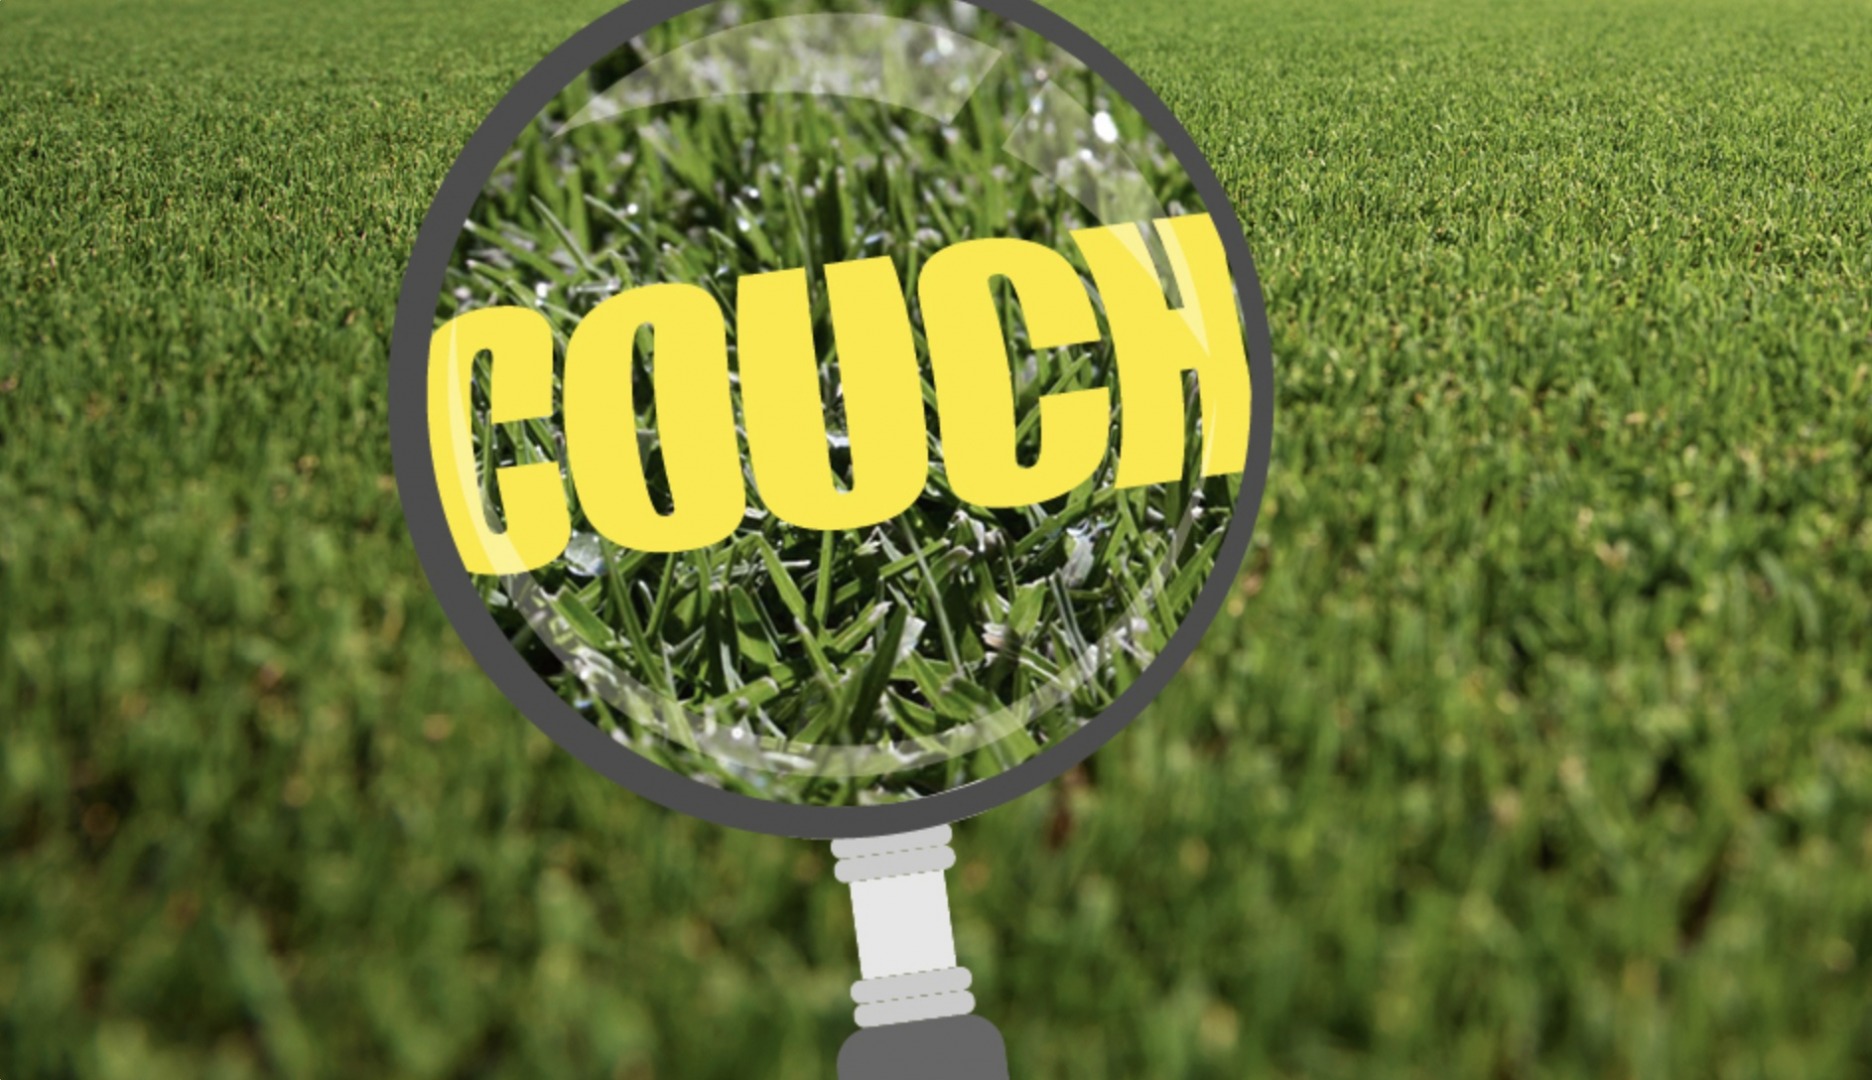 Couch Grass